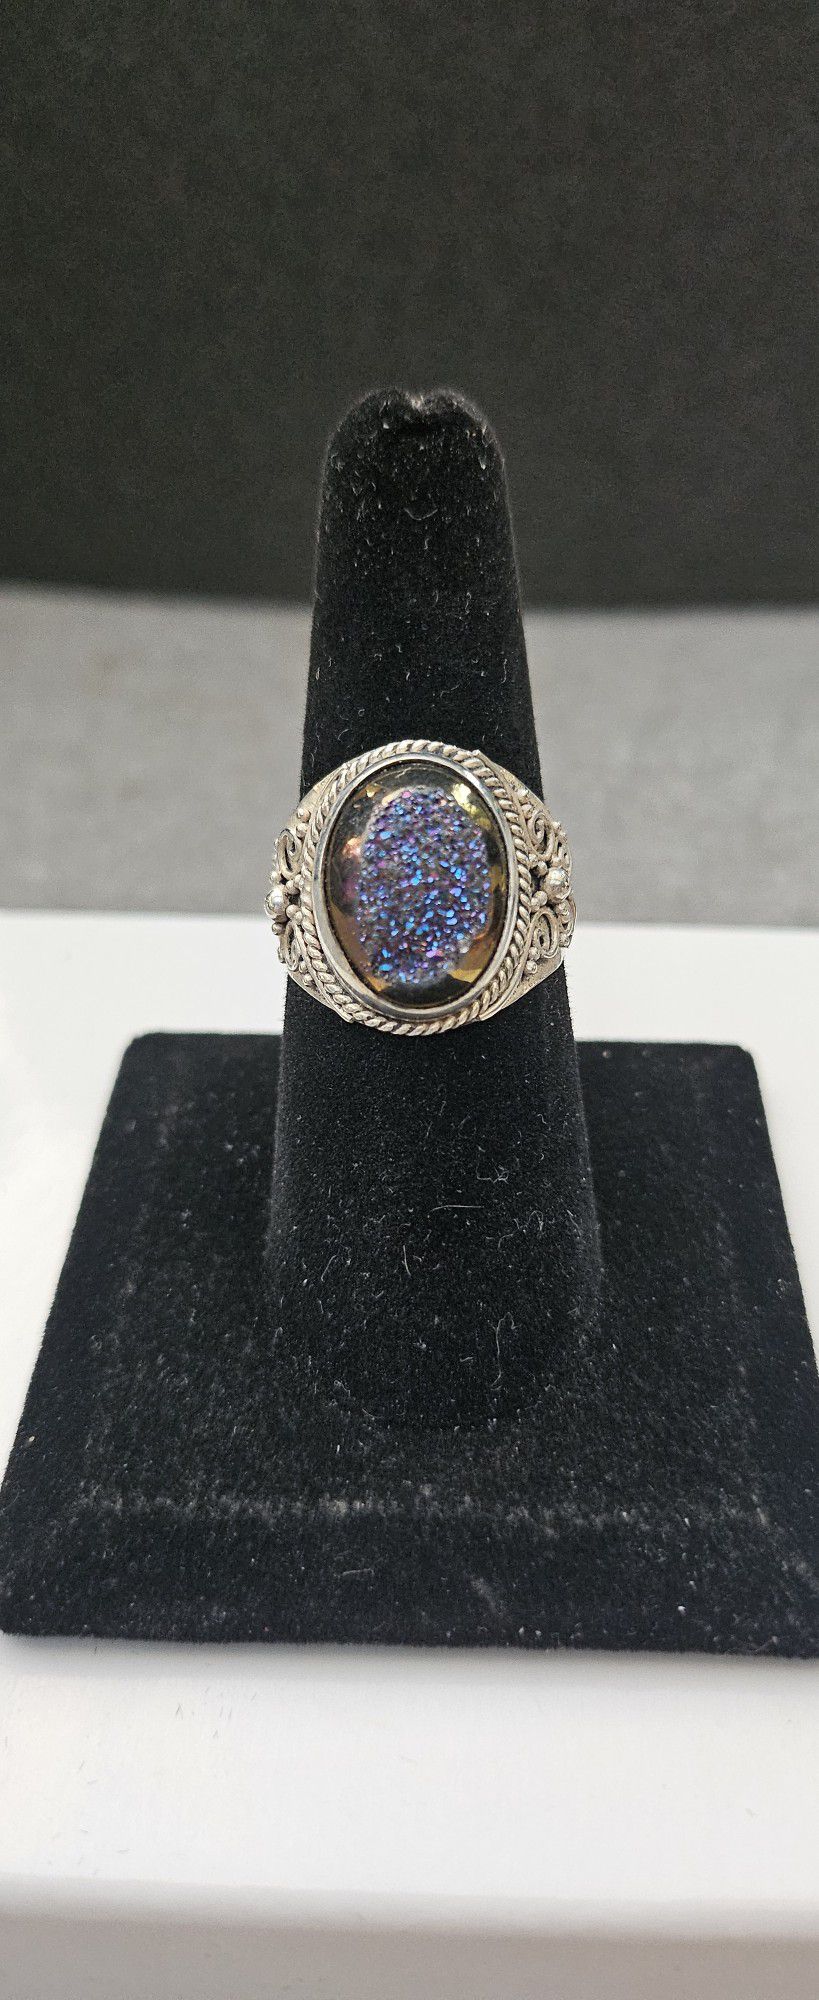 Bali Collection  Druzy Ring